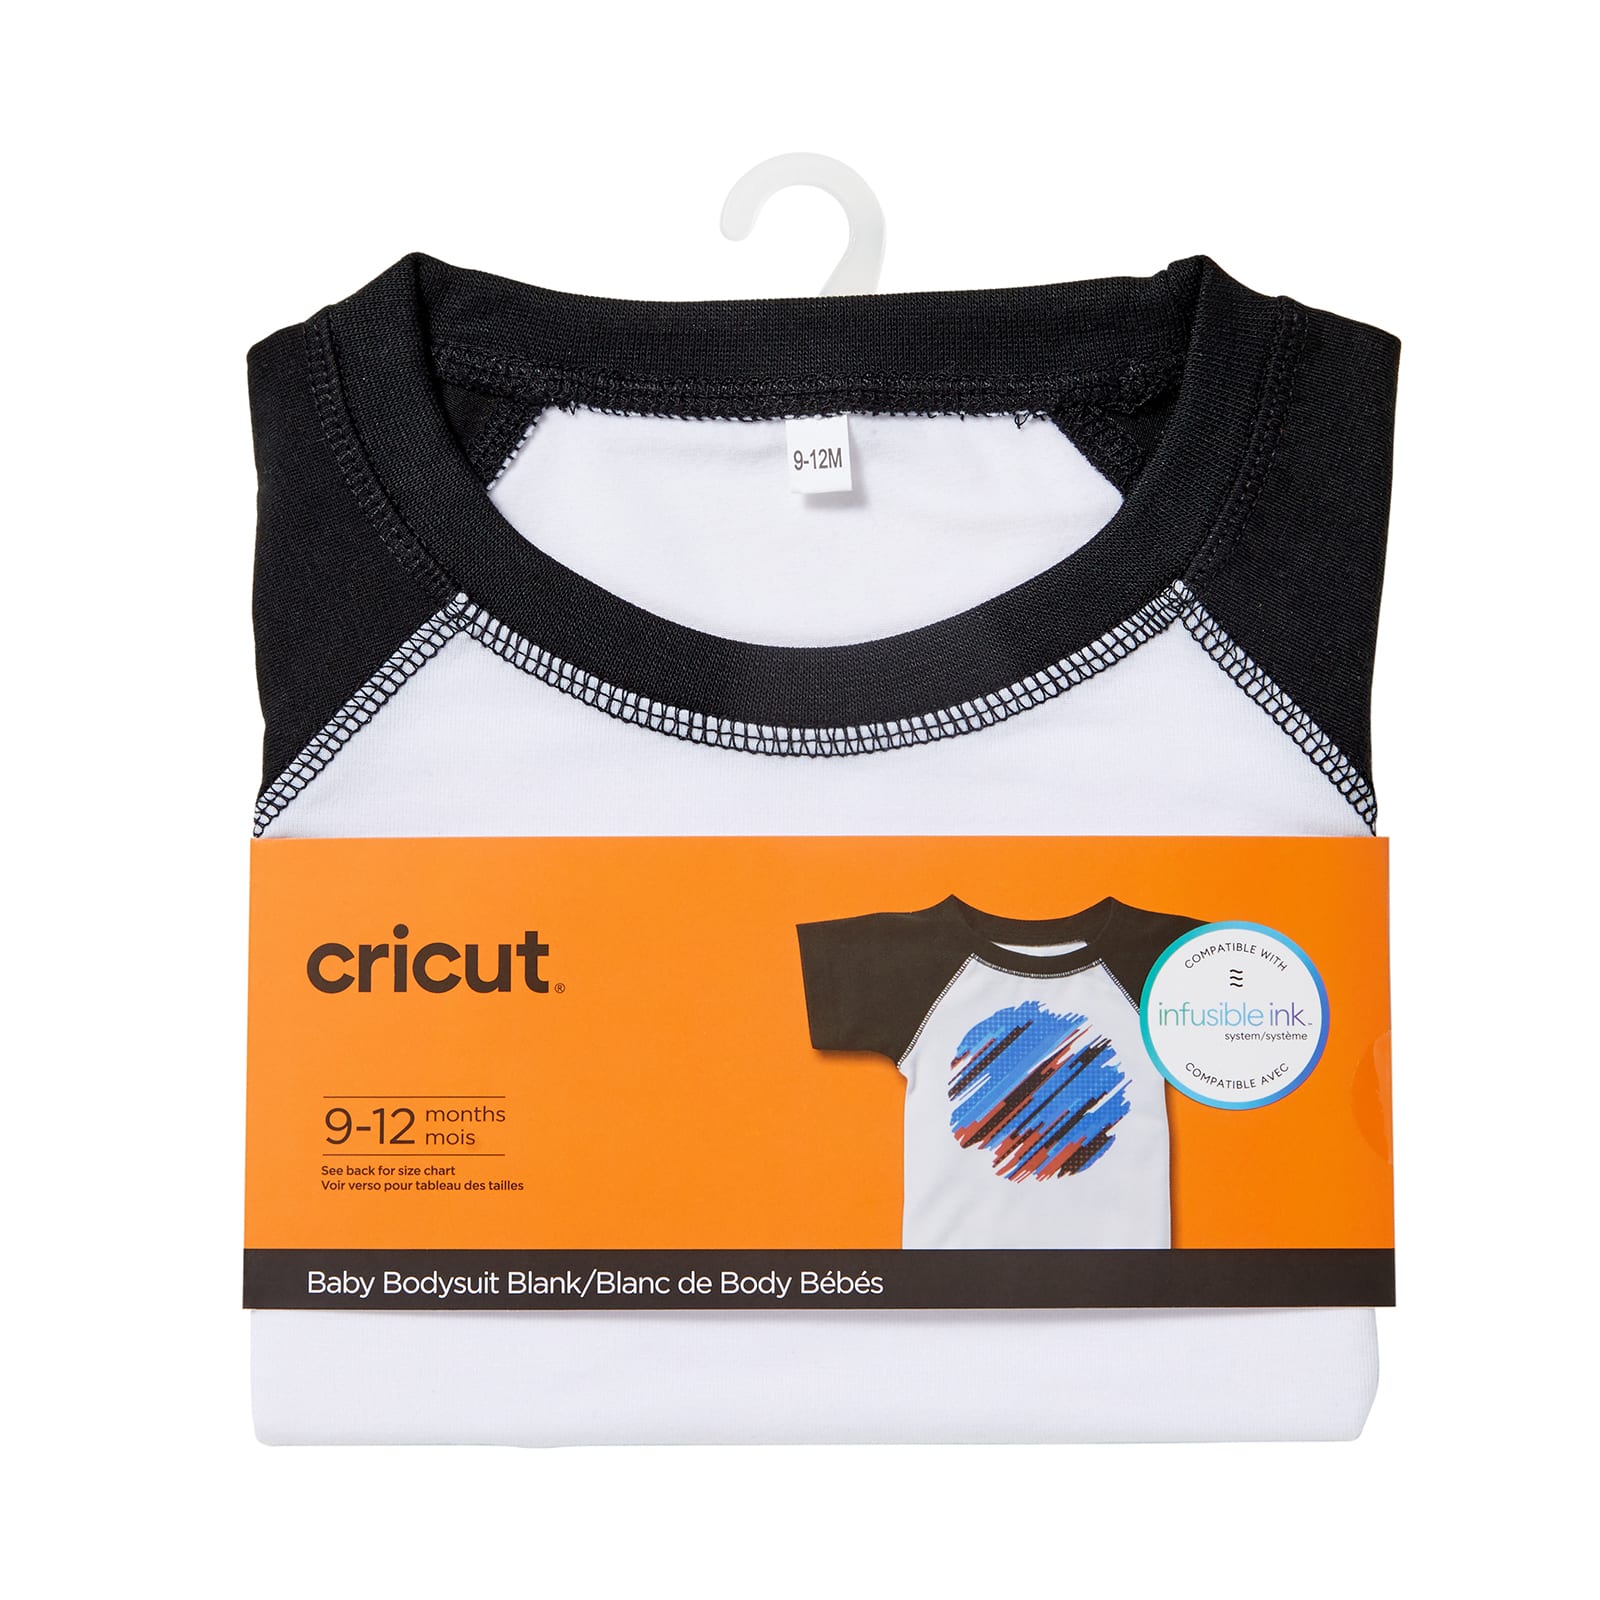 Sublimation shirts on sale @Cricut price match them at @Michaels Store